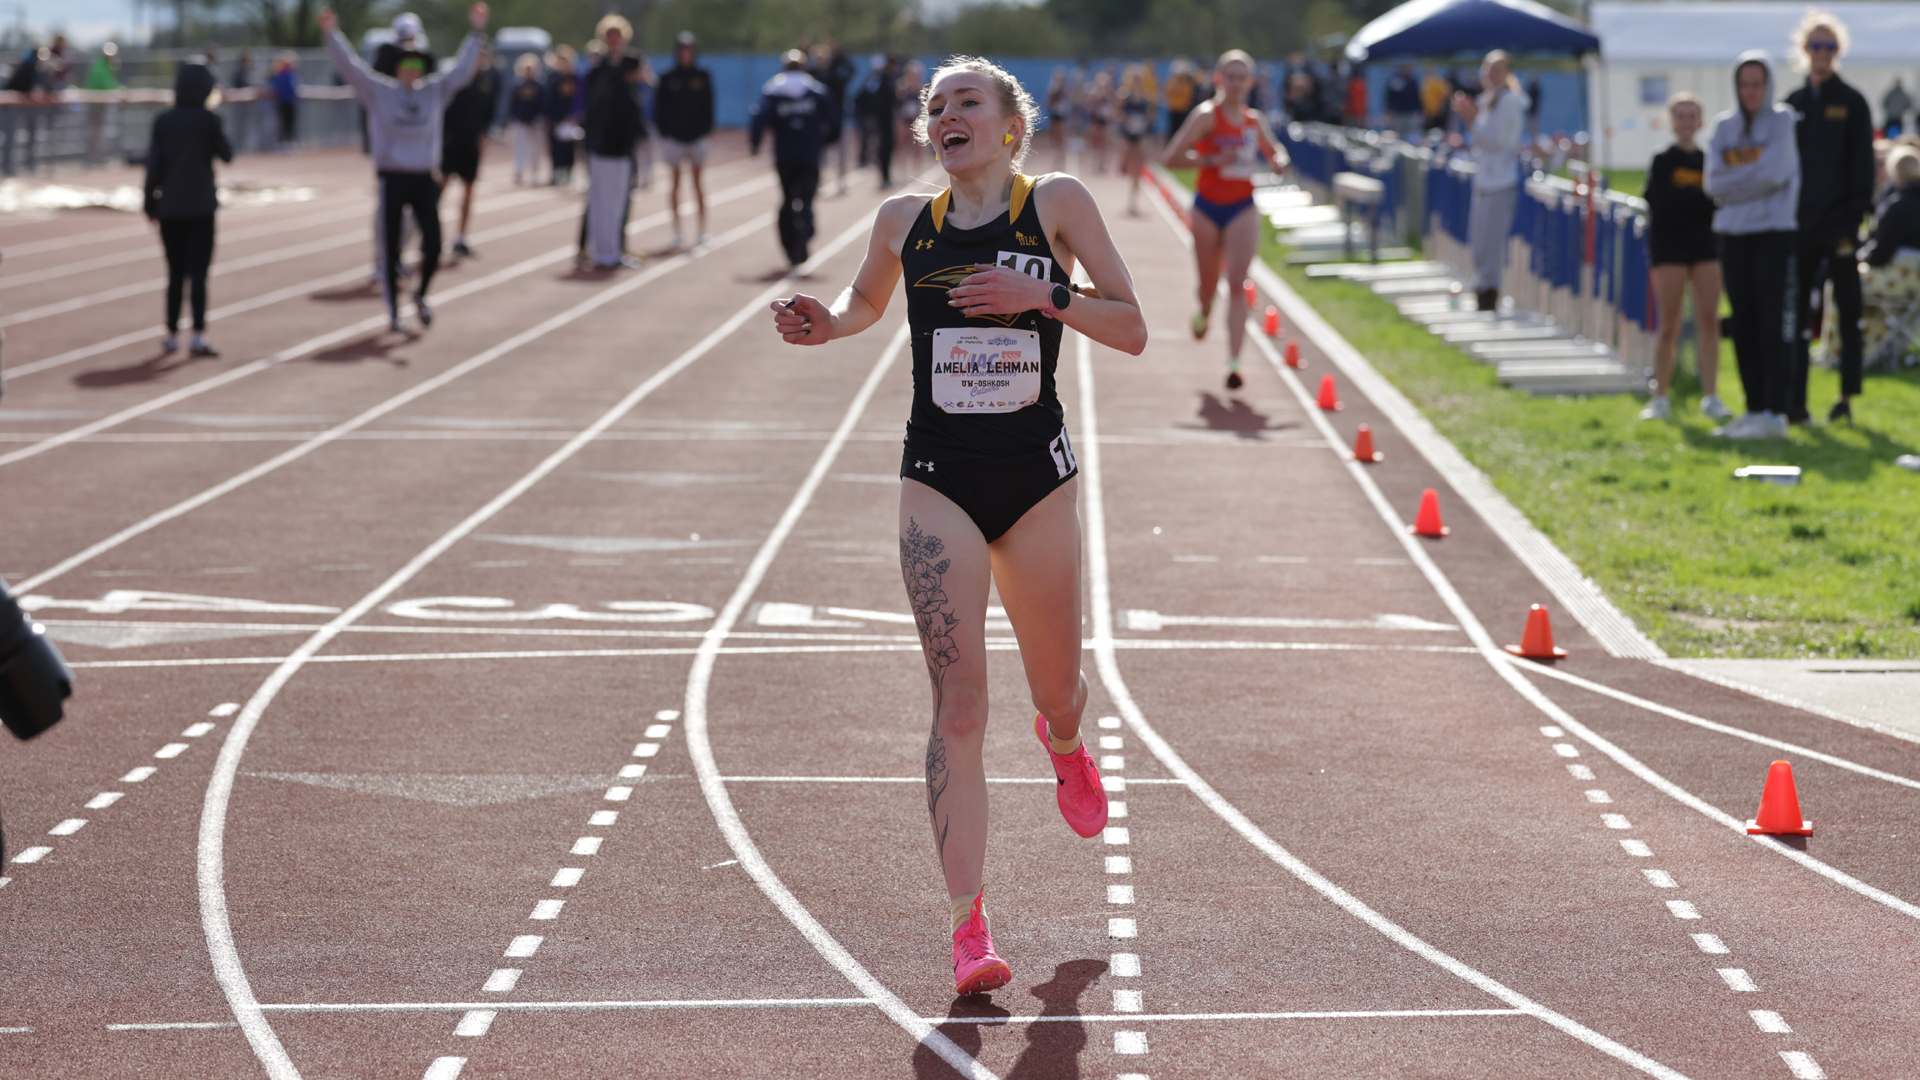 Amelia Lehman won the 1,500- and 5,000-meter runs at the WIAC Championship on Saturday. Photo Credit: Steve Frommell, UW-Oshkosh Sports Information